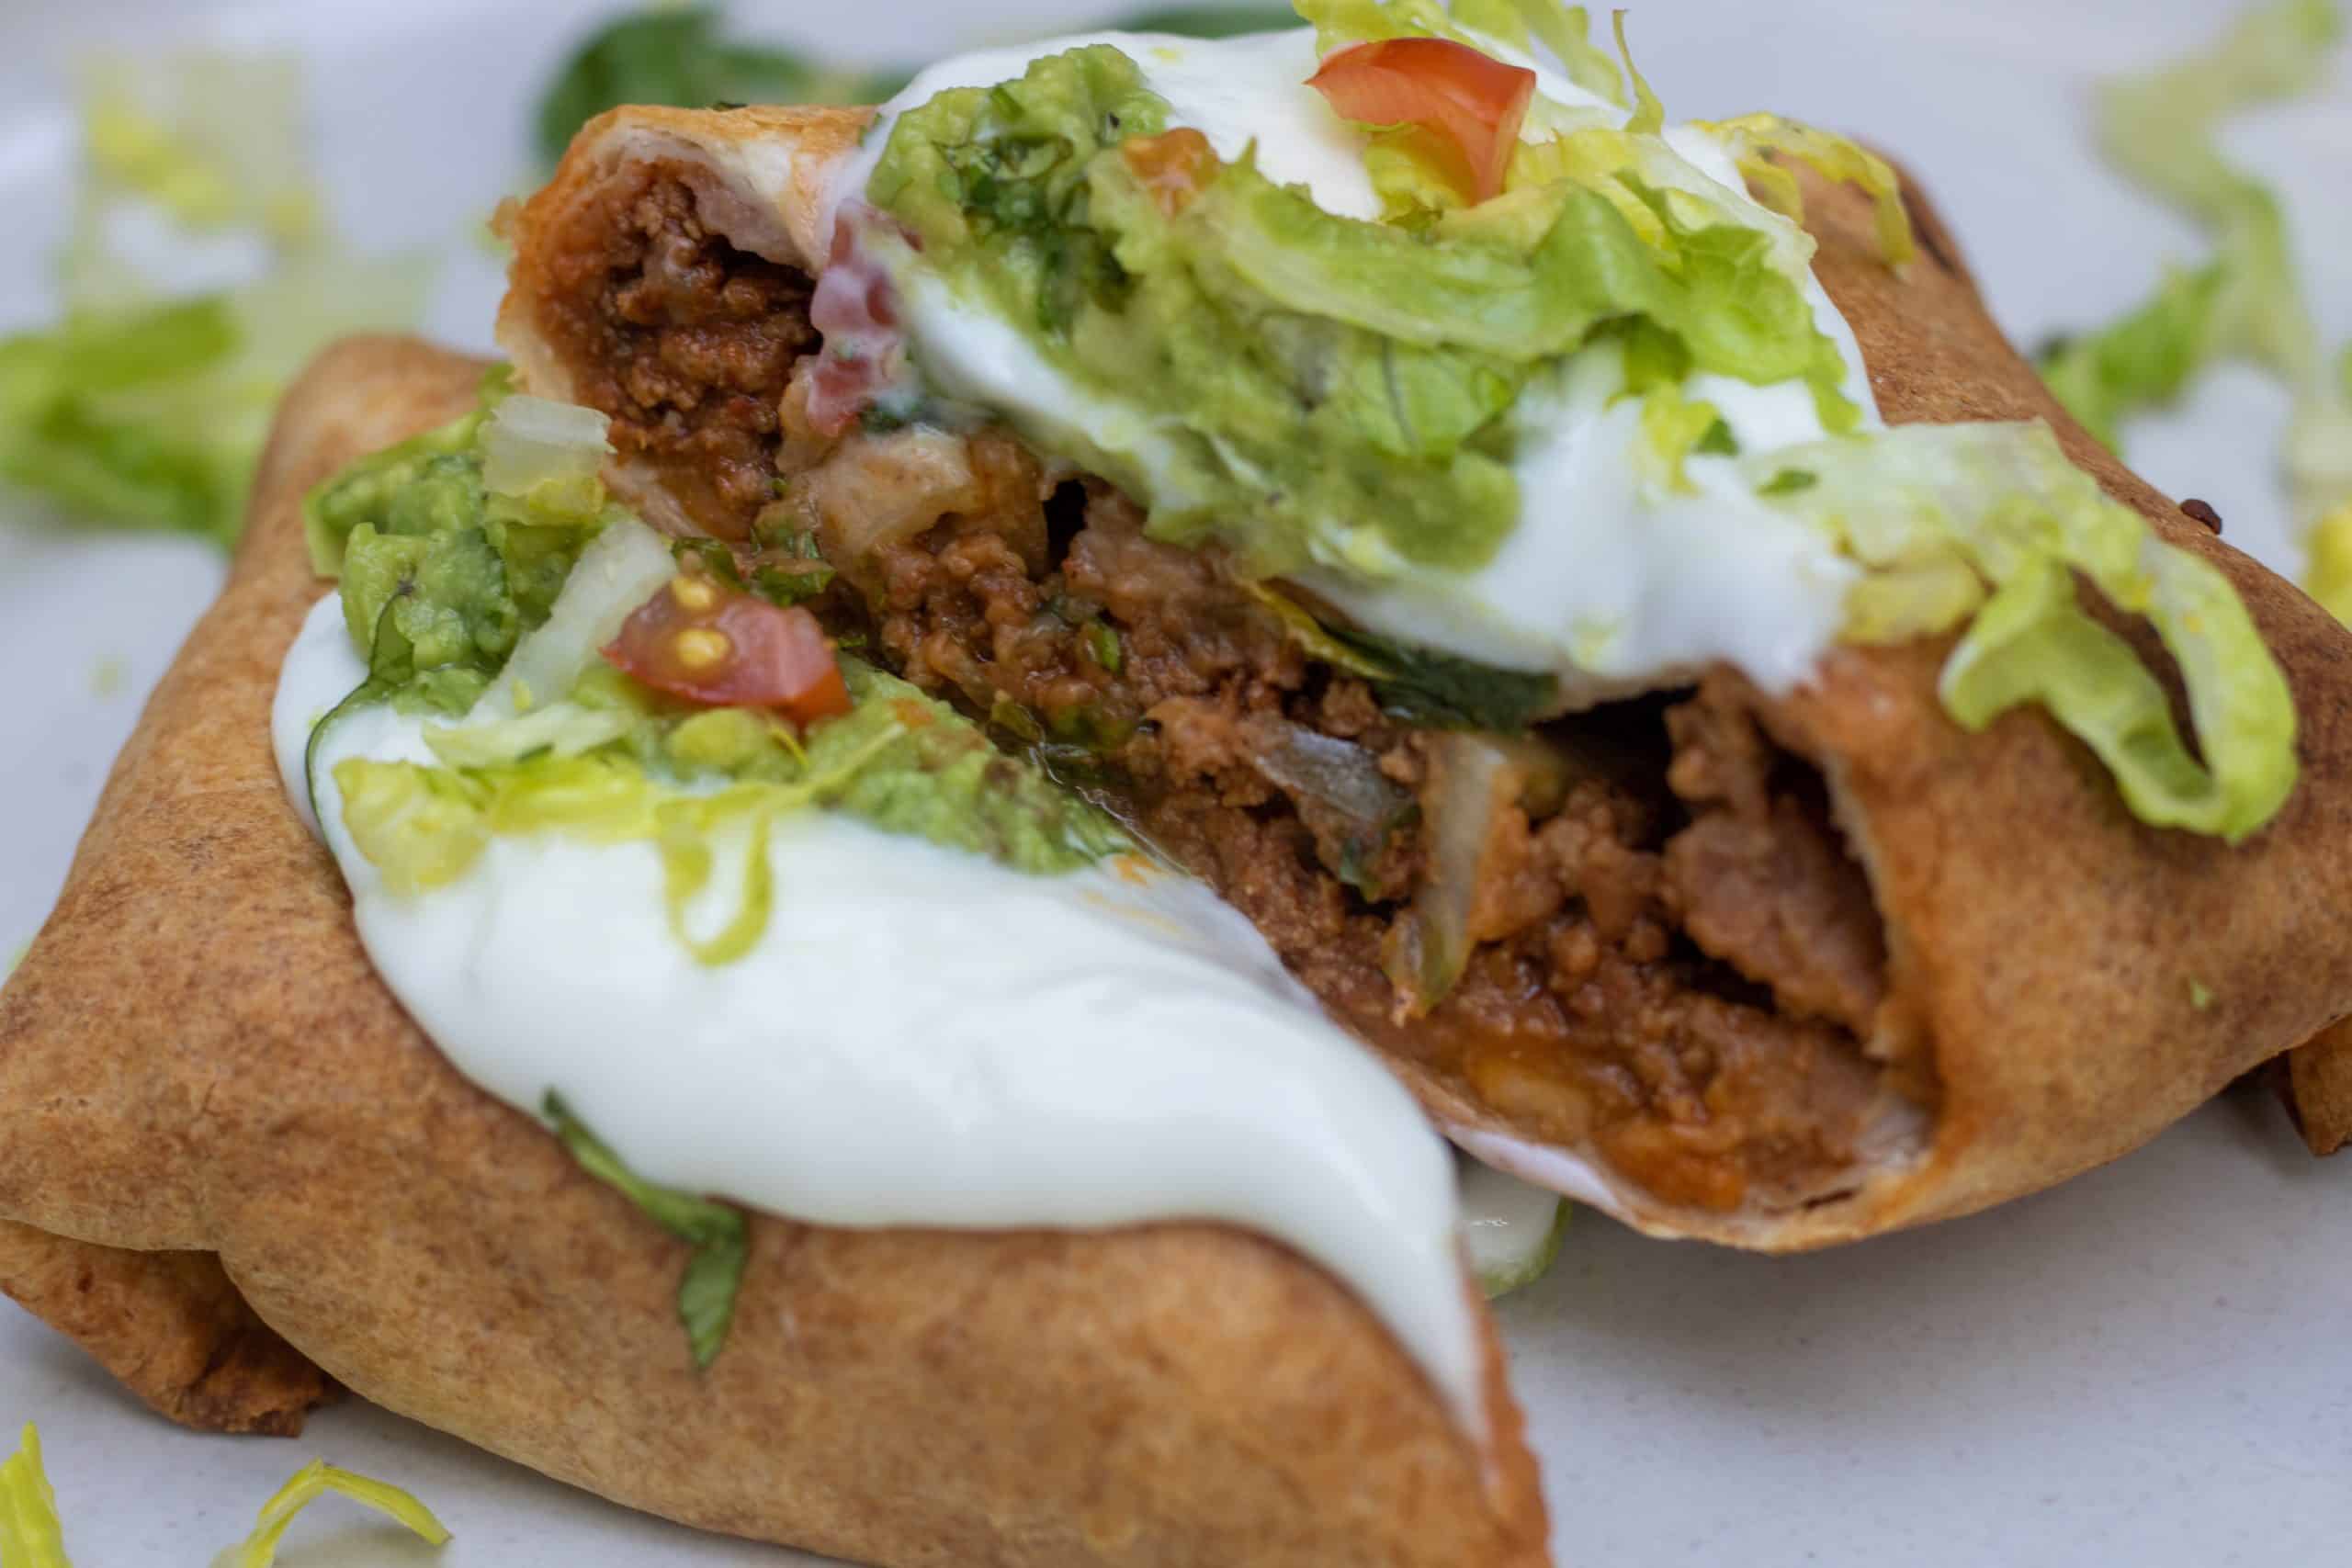 A crispy healthy air fryer beef chimichanga that's cut in half so you can see the ground beef and refried bean filling. It's topped with sour cream, guacamole and shredded lettuce